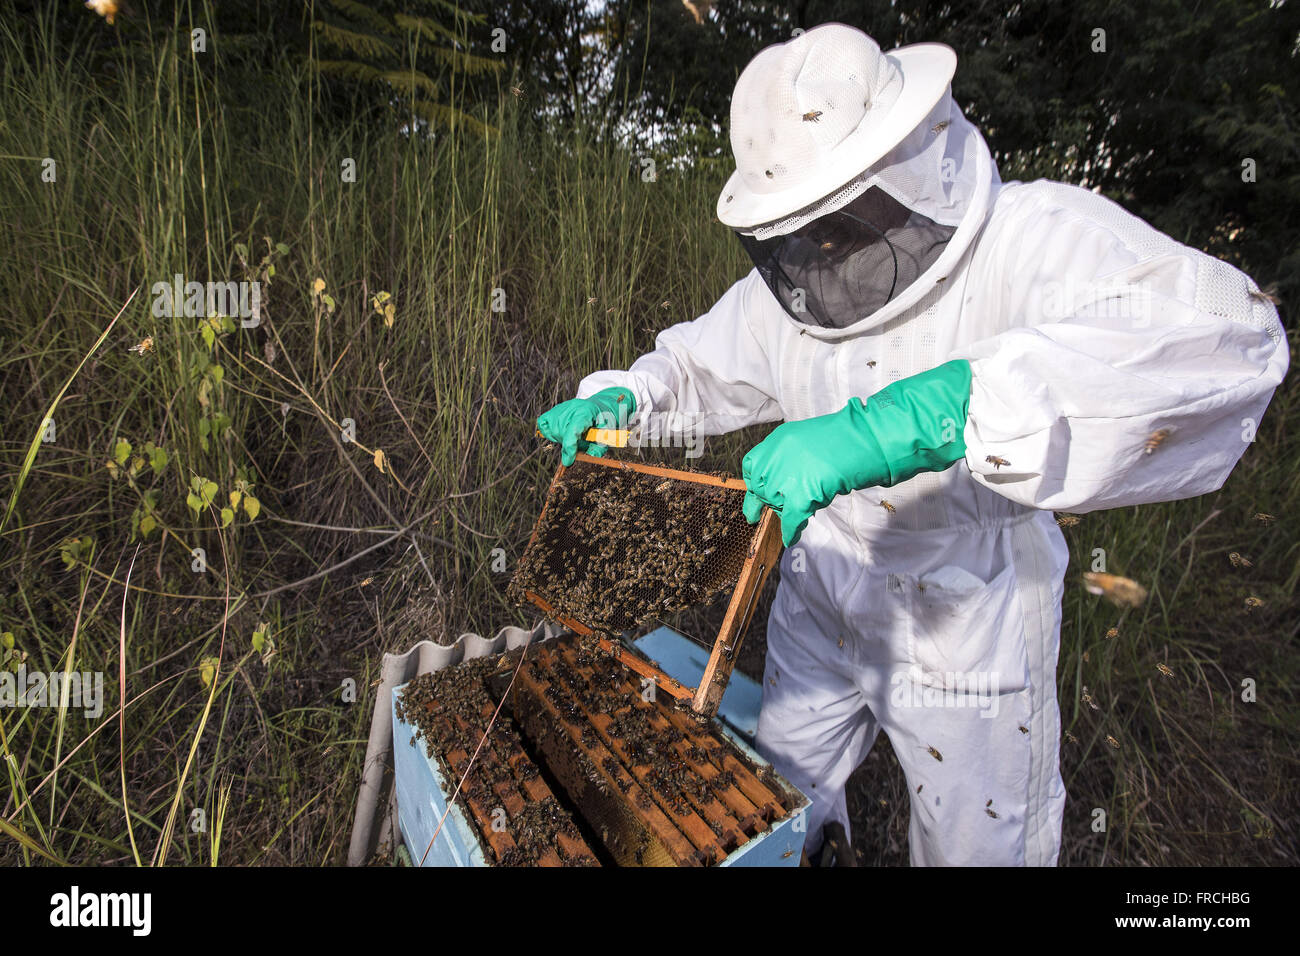 Beekeeper working in apiary honey extraction in the Congonhas district Stock Photo